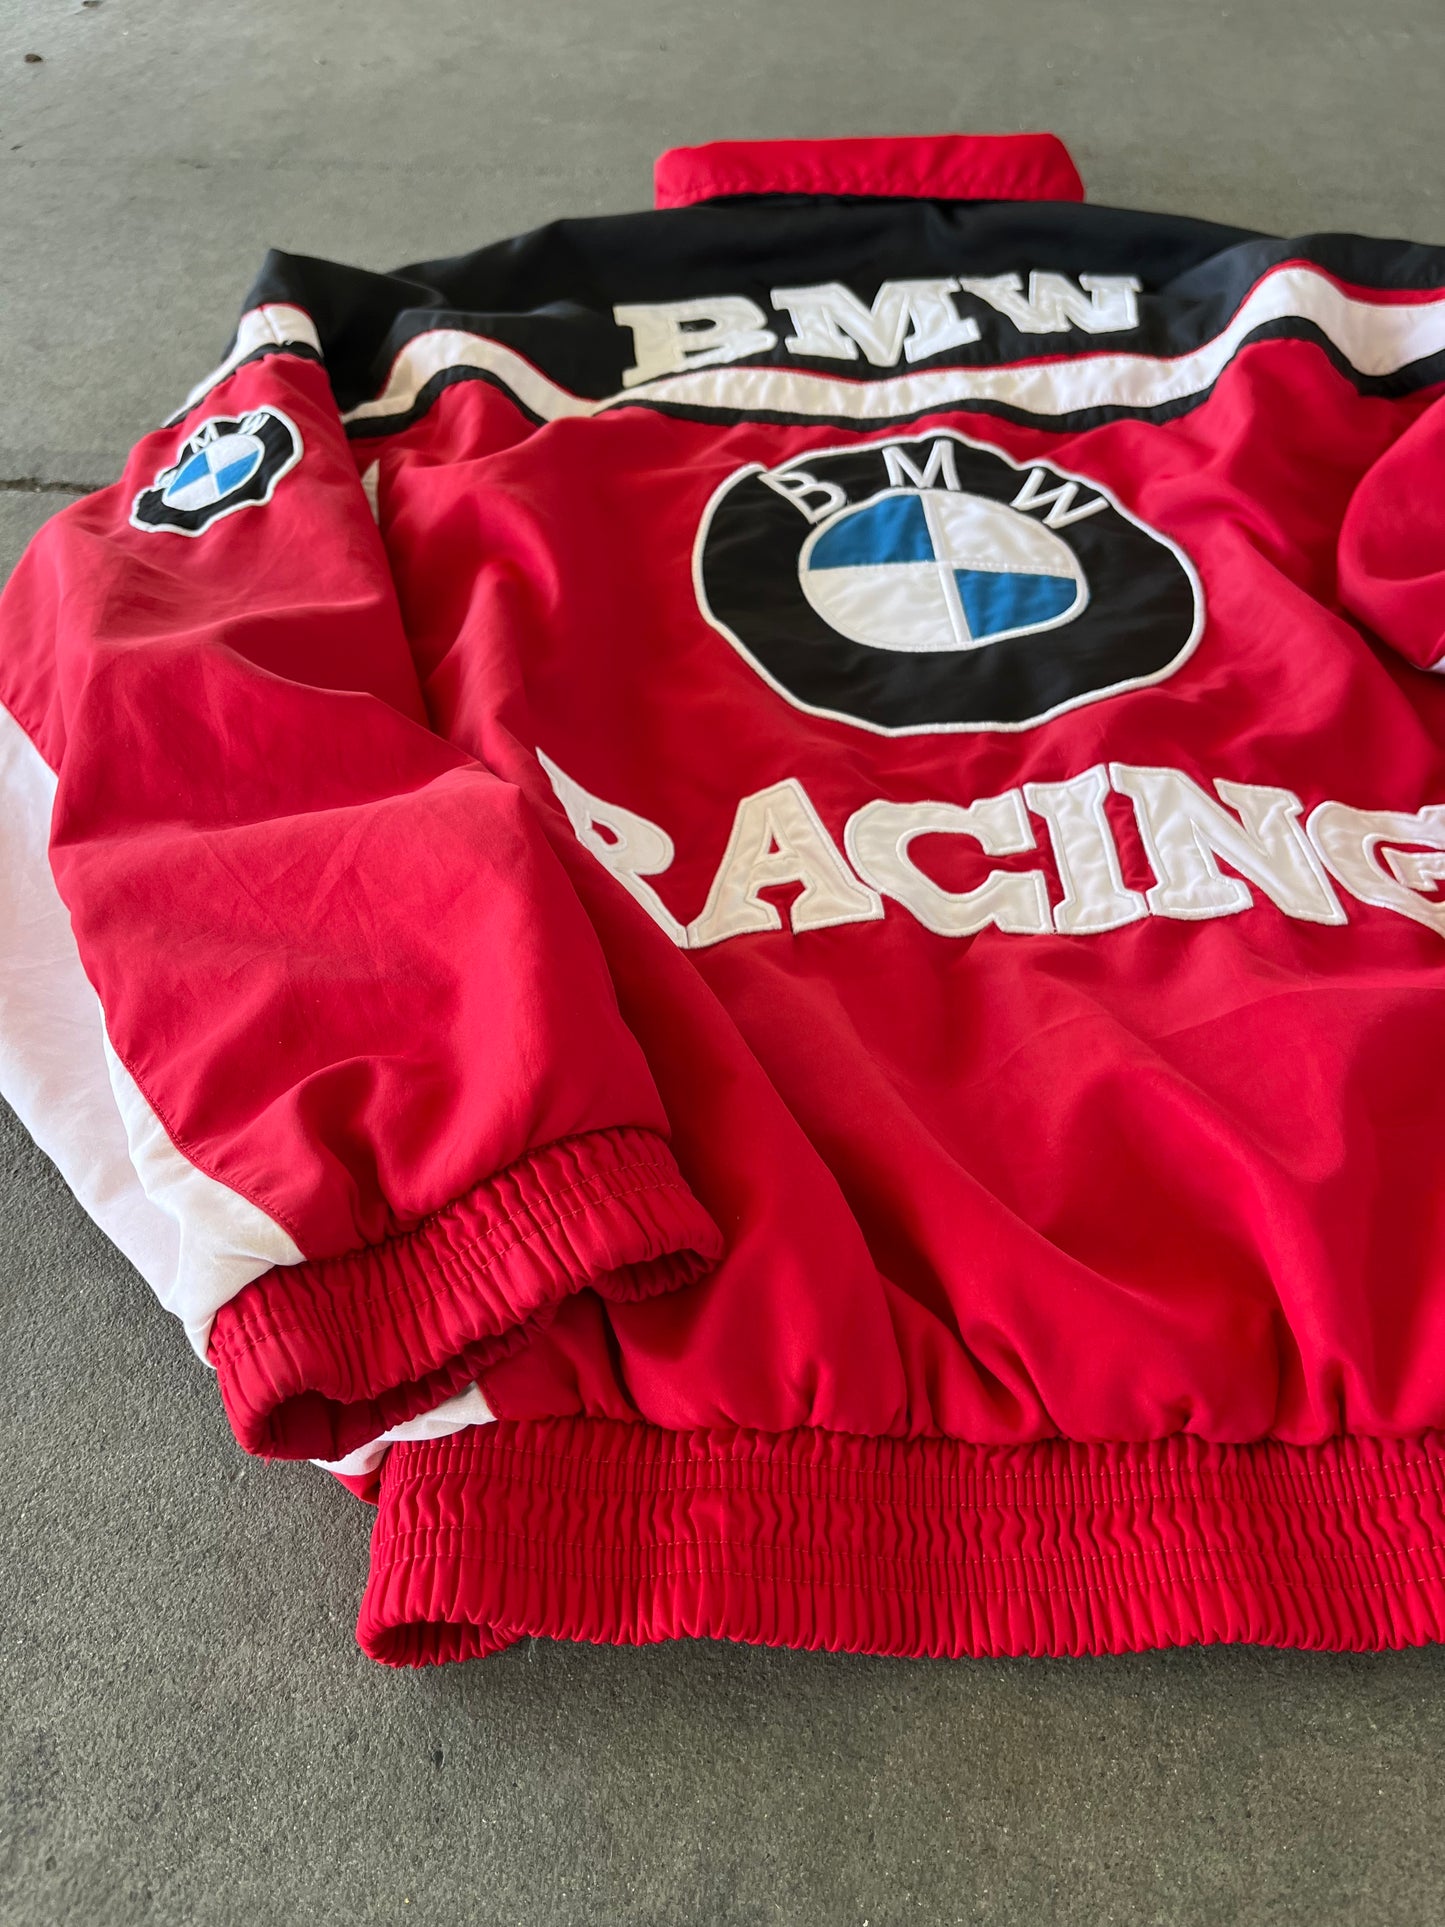 90s BMW Racing Fully Embroidered Jacket